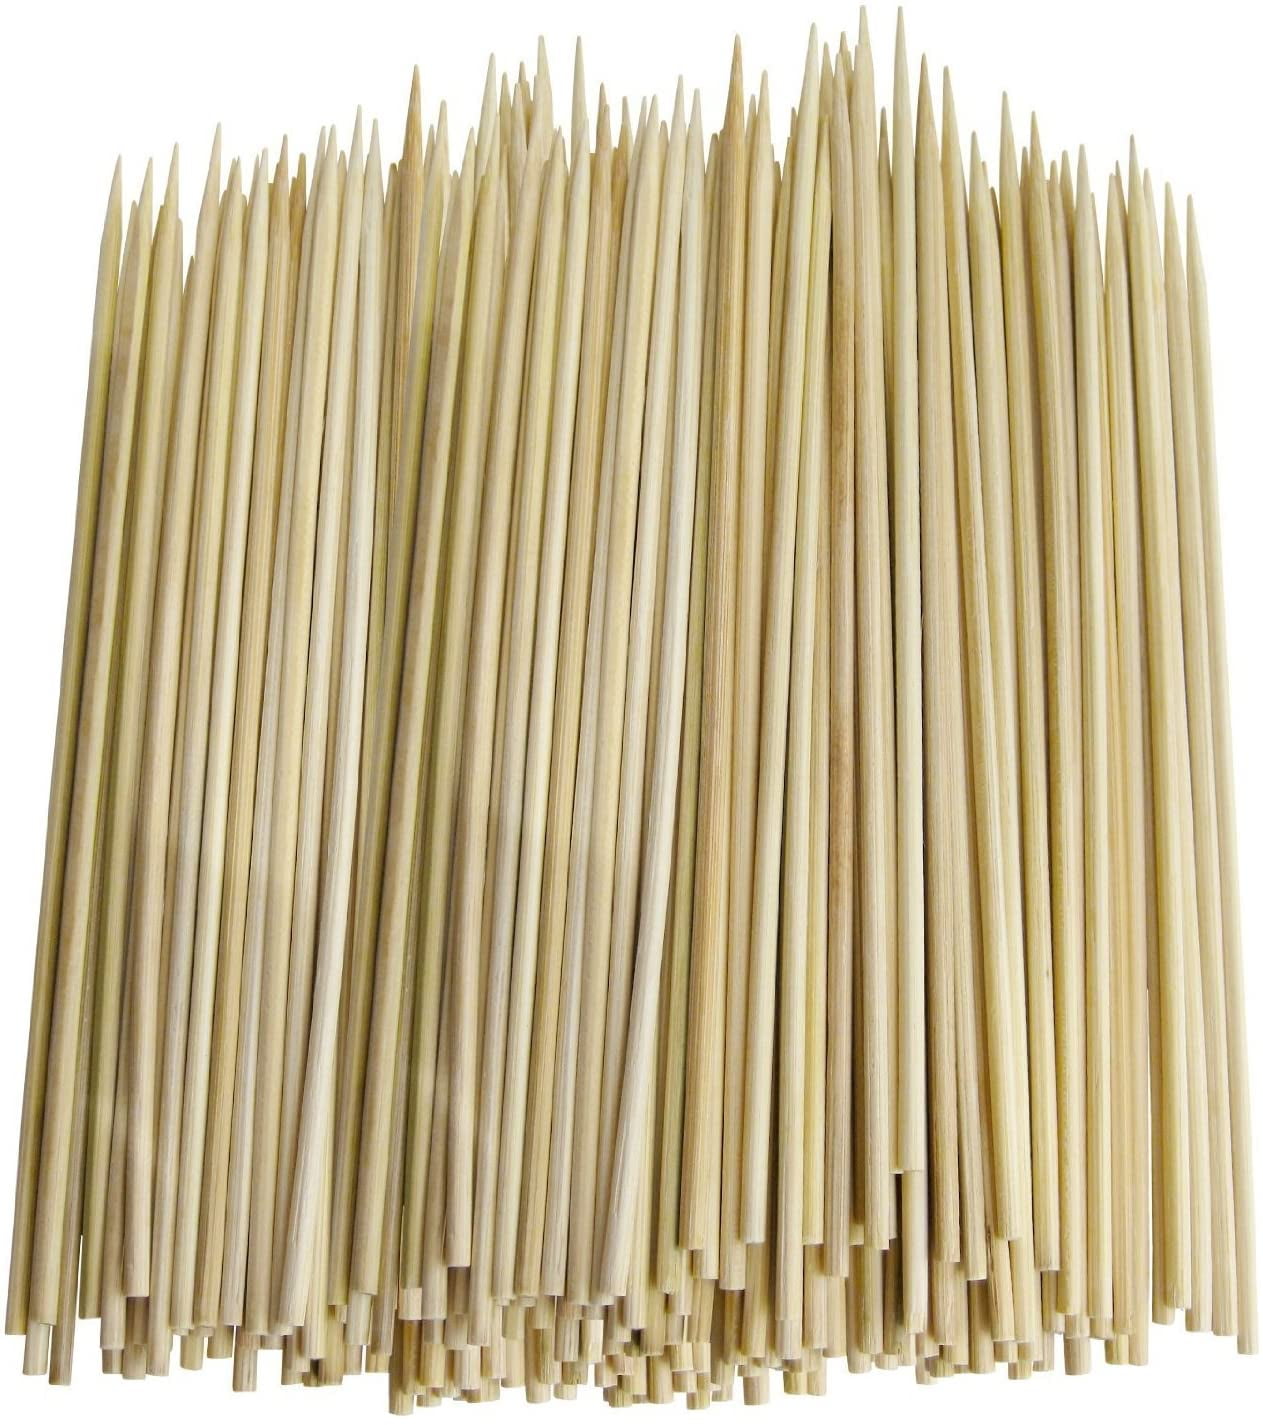 12-Inch Bamboo Skewers Winco WSK-12 100/PK 